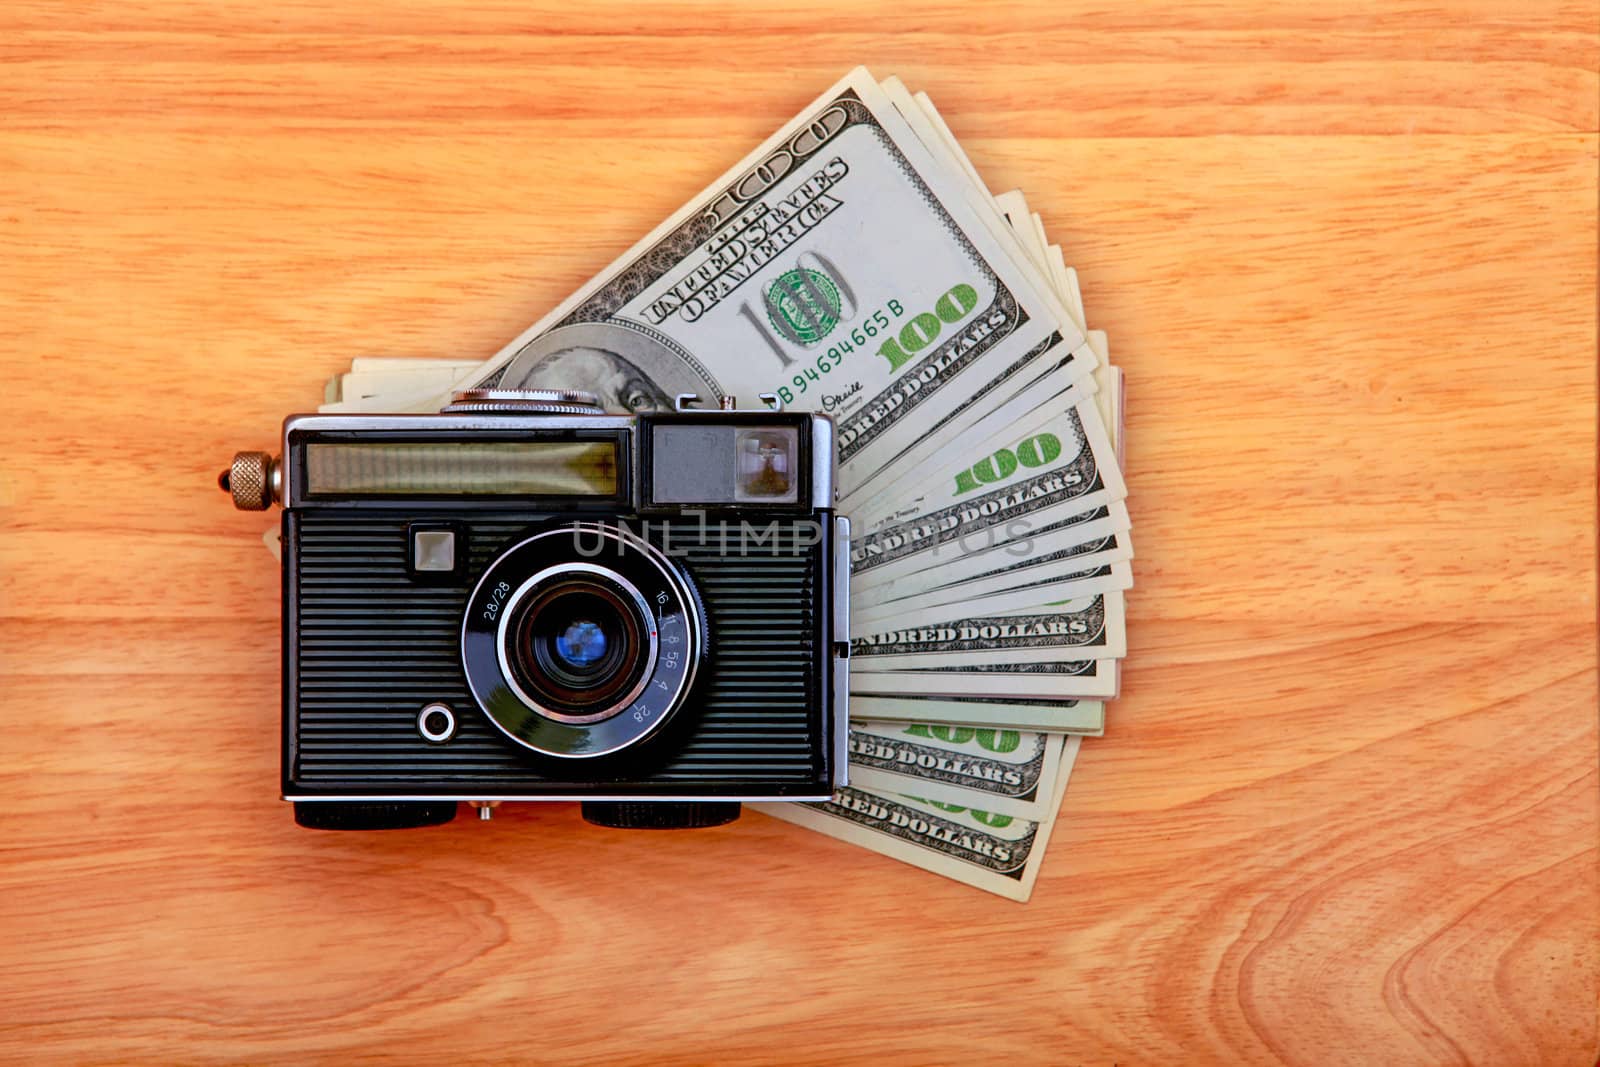 Vintage Camera And Money on the Wooden Background